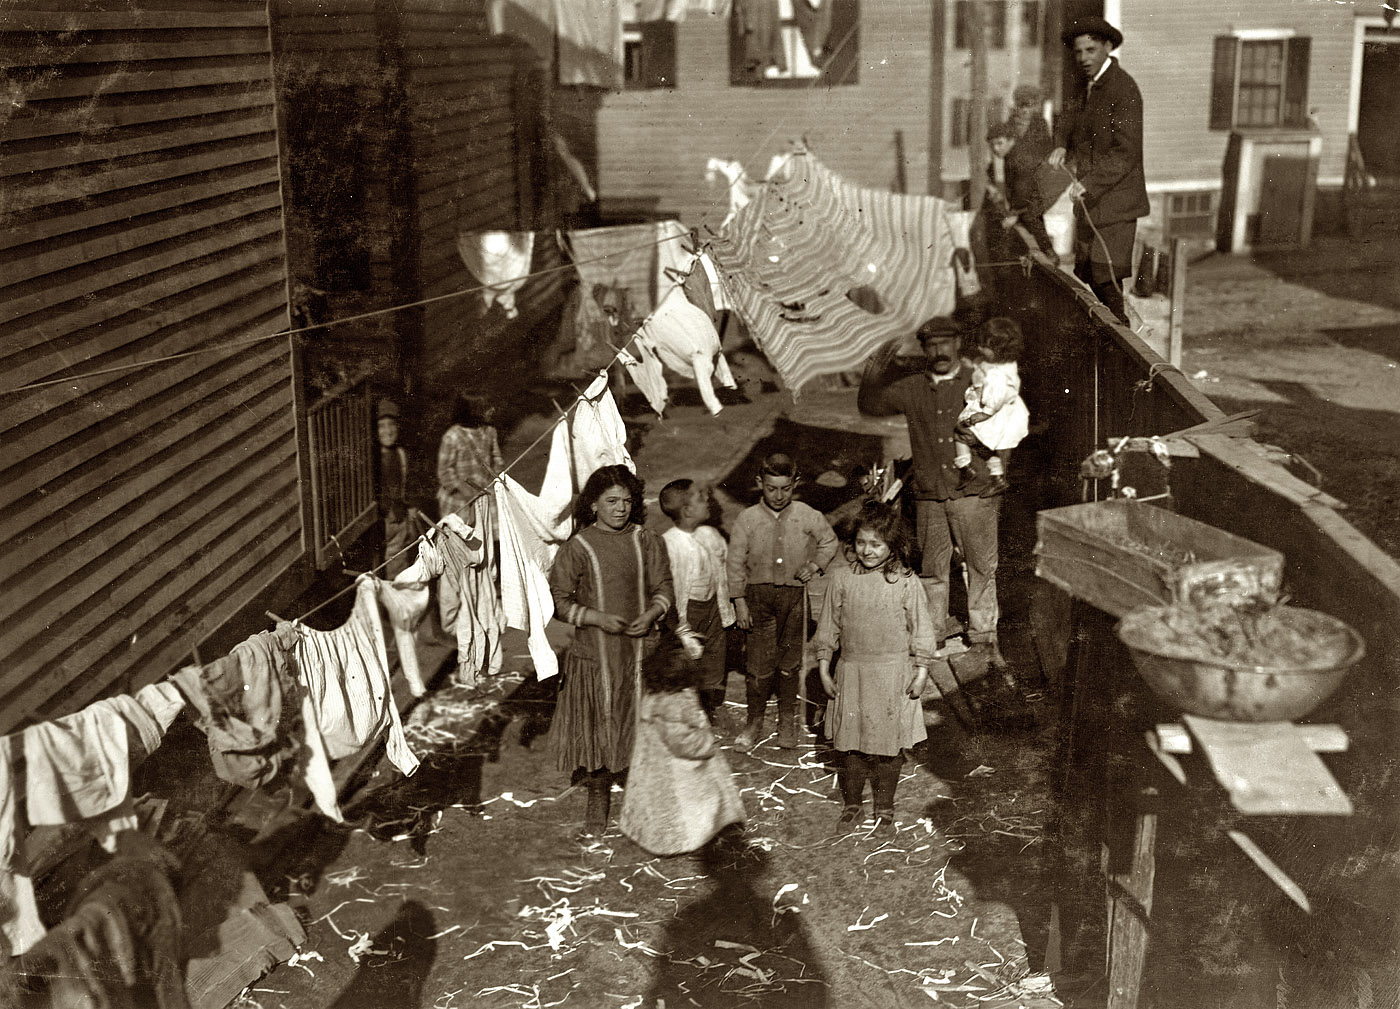 November 23, 1912. Providence, Rhode Island. "Housing conditions, rear of Republican Street." View full size. Photograph by Lewis Wickes Hine.